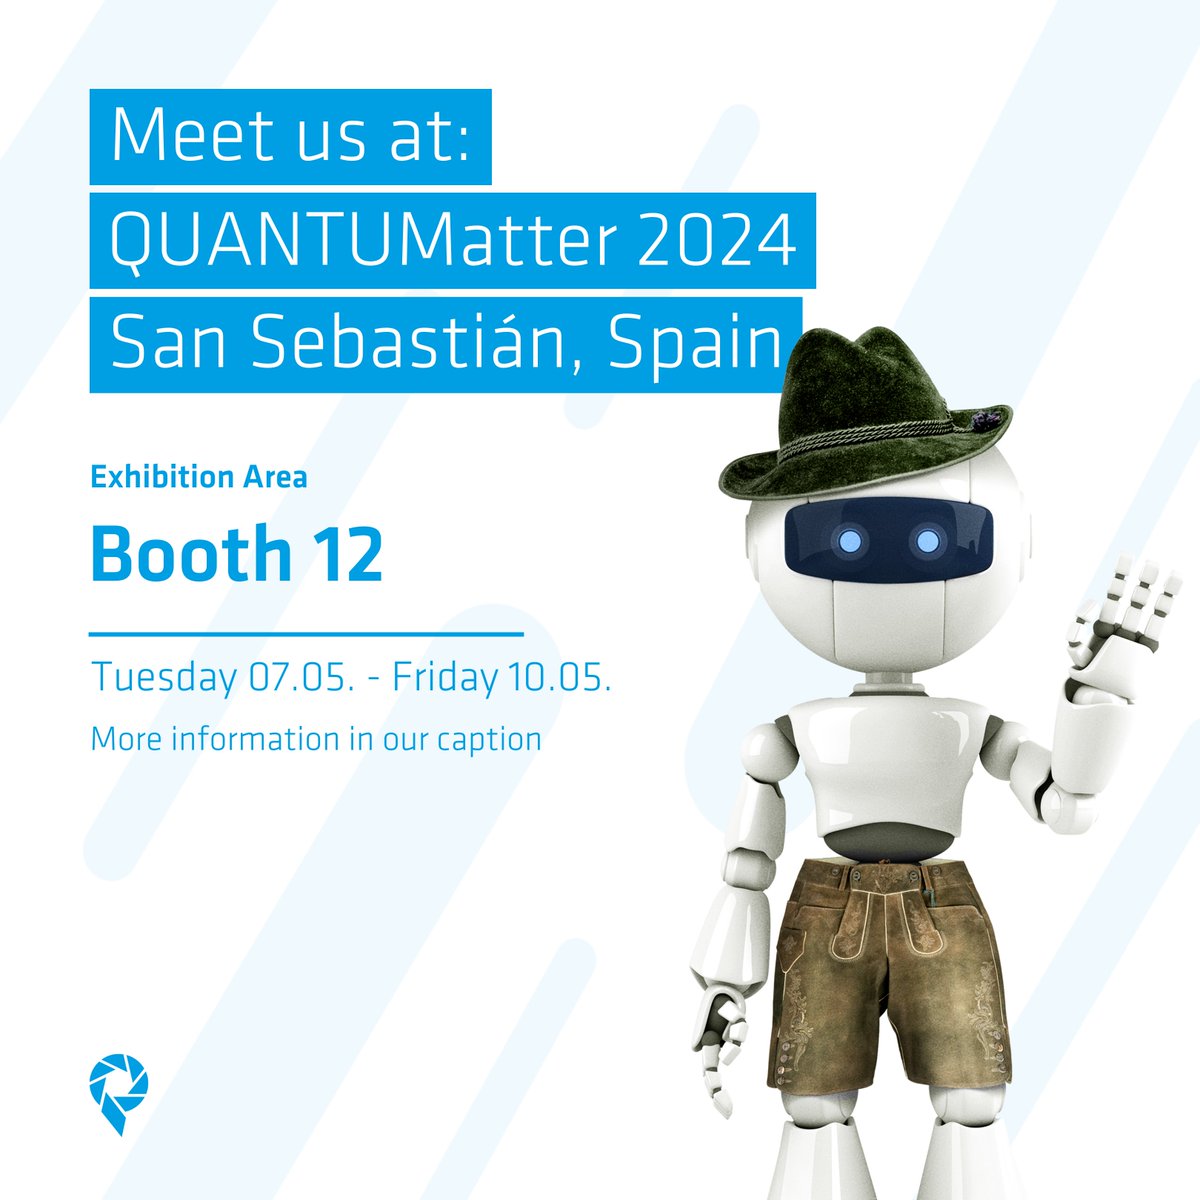 Join QUANTUMatter 2024 in San Sebastian, Spain! Explore quantum innovation and technologies with Katinka Uppendahl and Anissa Nasser at booth 12. Engage in discussions on quantum information and matter, including topological insulators. Talk to us first! 🚀
#QUANTUMatter2024